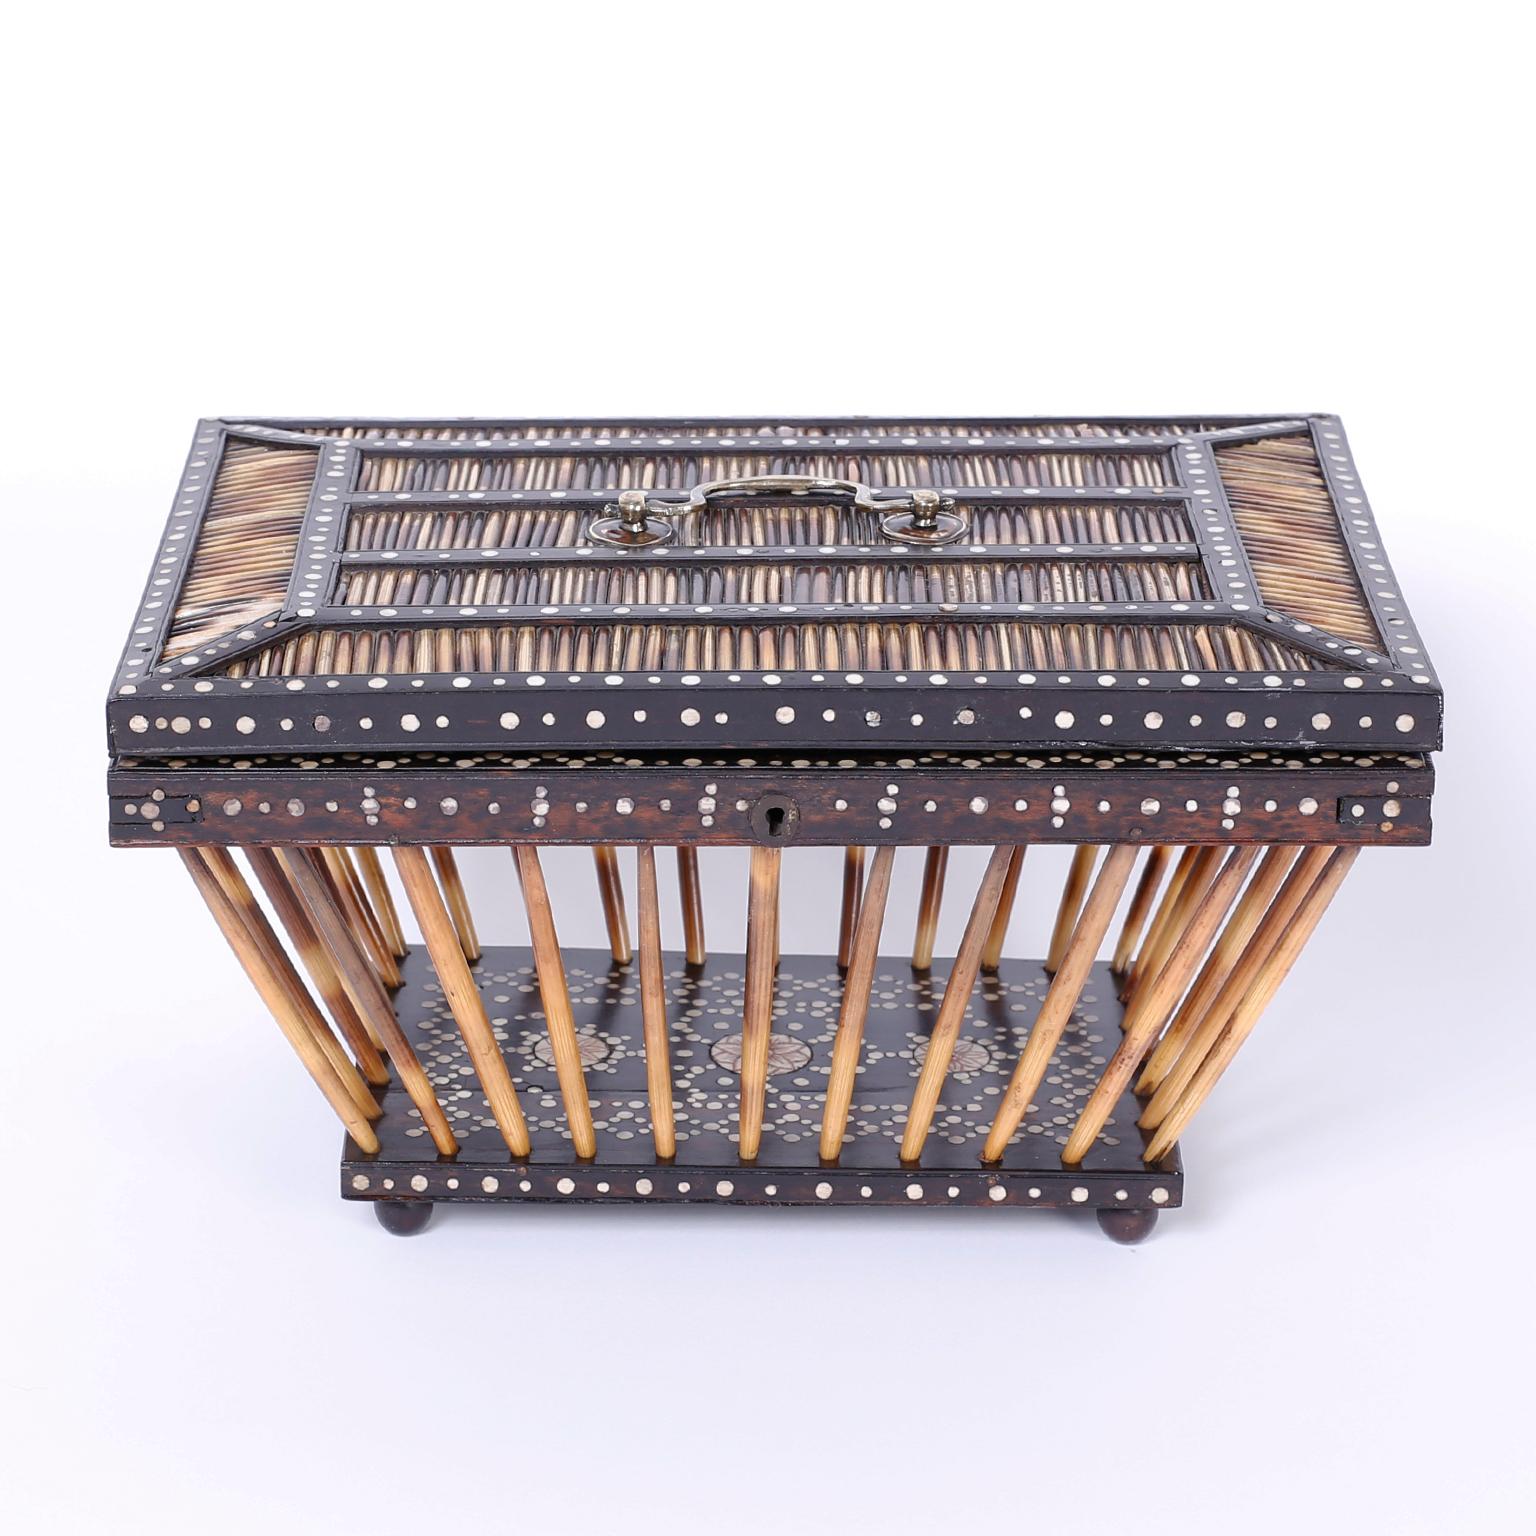 Refined Anglo Indian basket or cricket box intricately crafted with porcupine quills and ebony, decorated with bone dots and painted floral designs from the island of Ceylon.